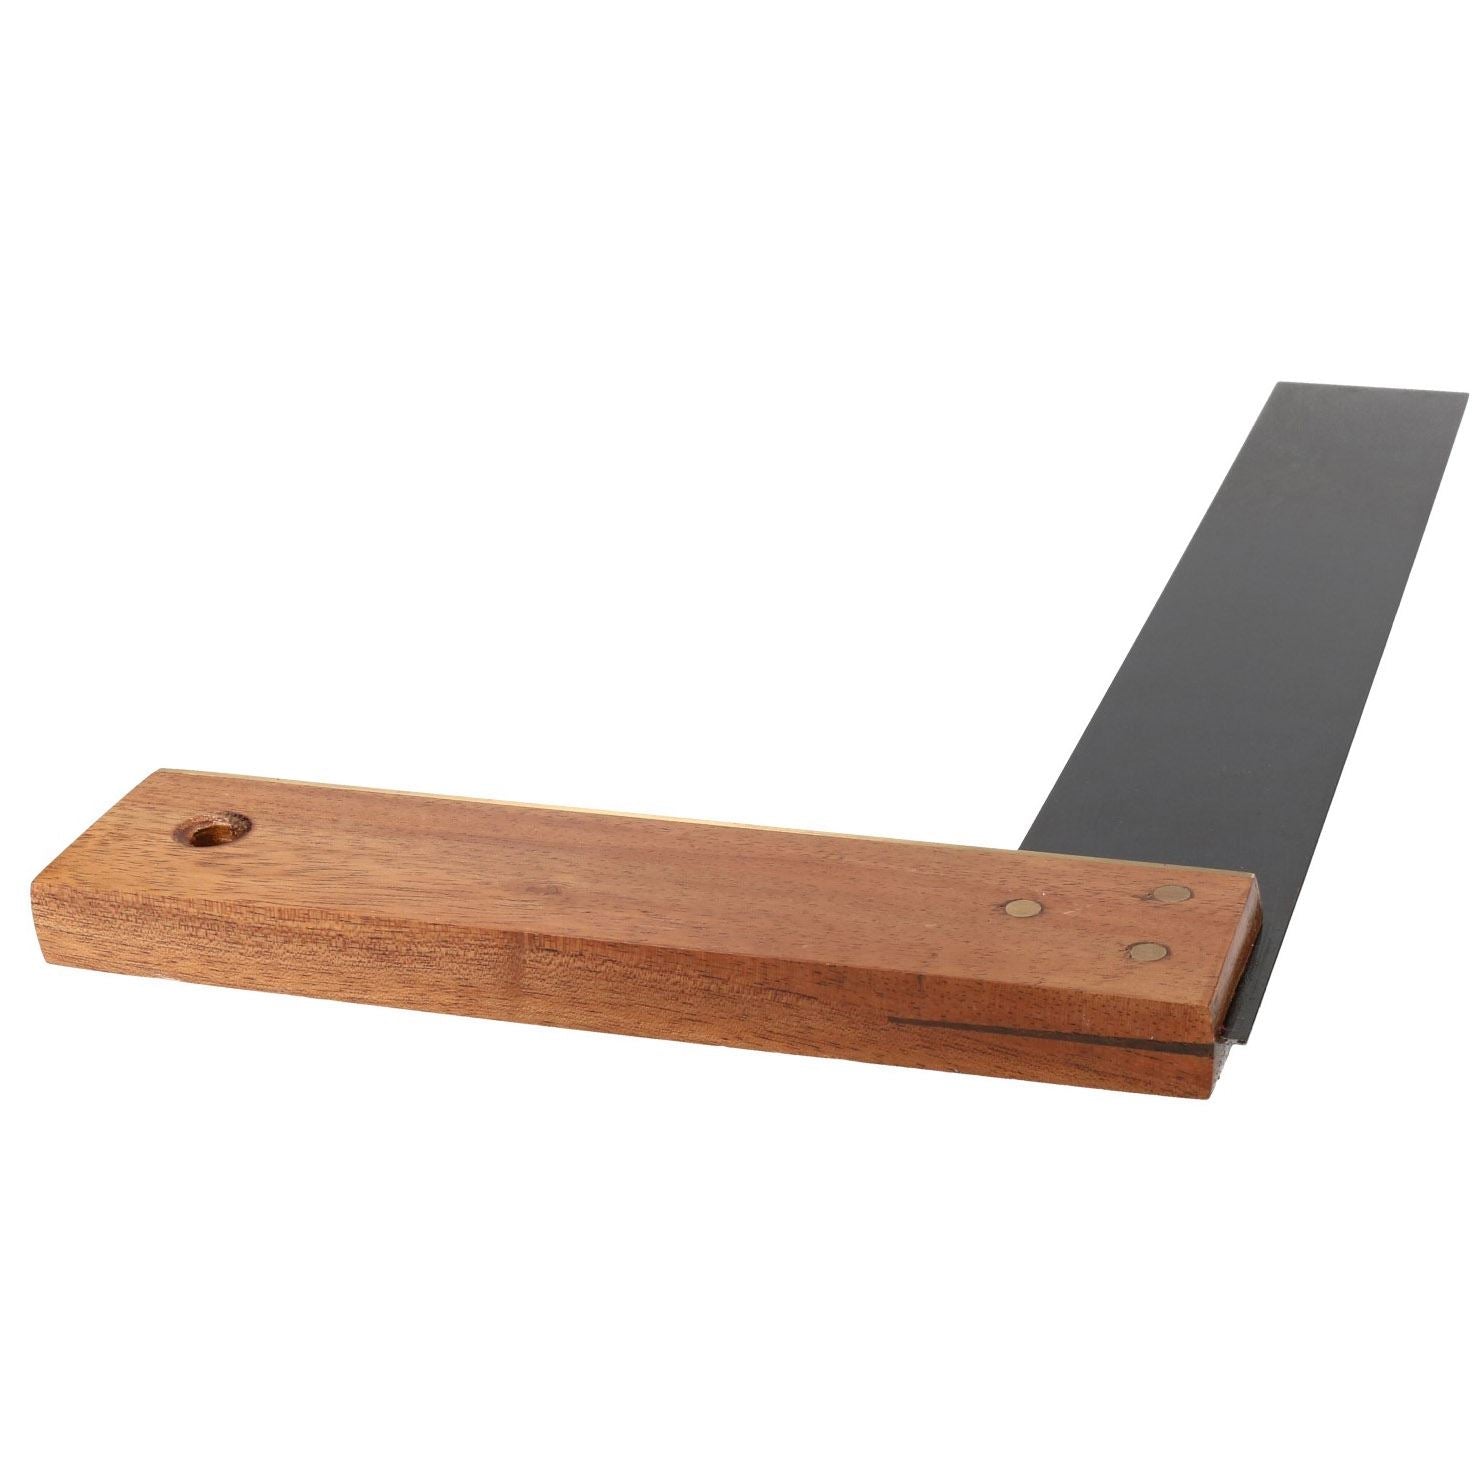 12" (300mm) Hardwood Try Engineer Square Precision Tri Set Square Right Angle